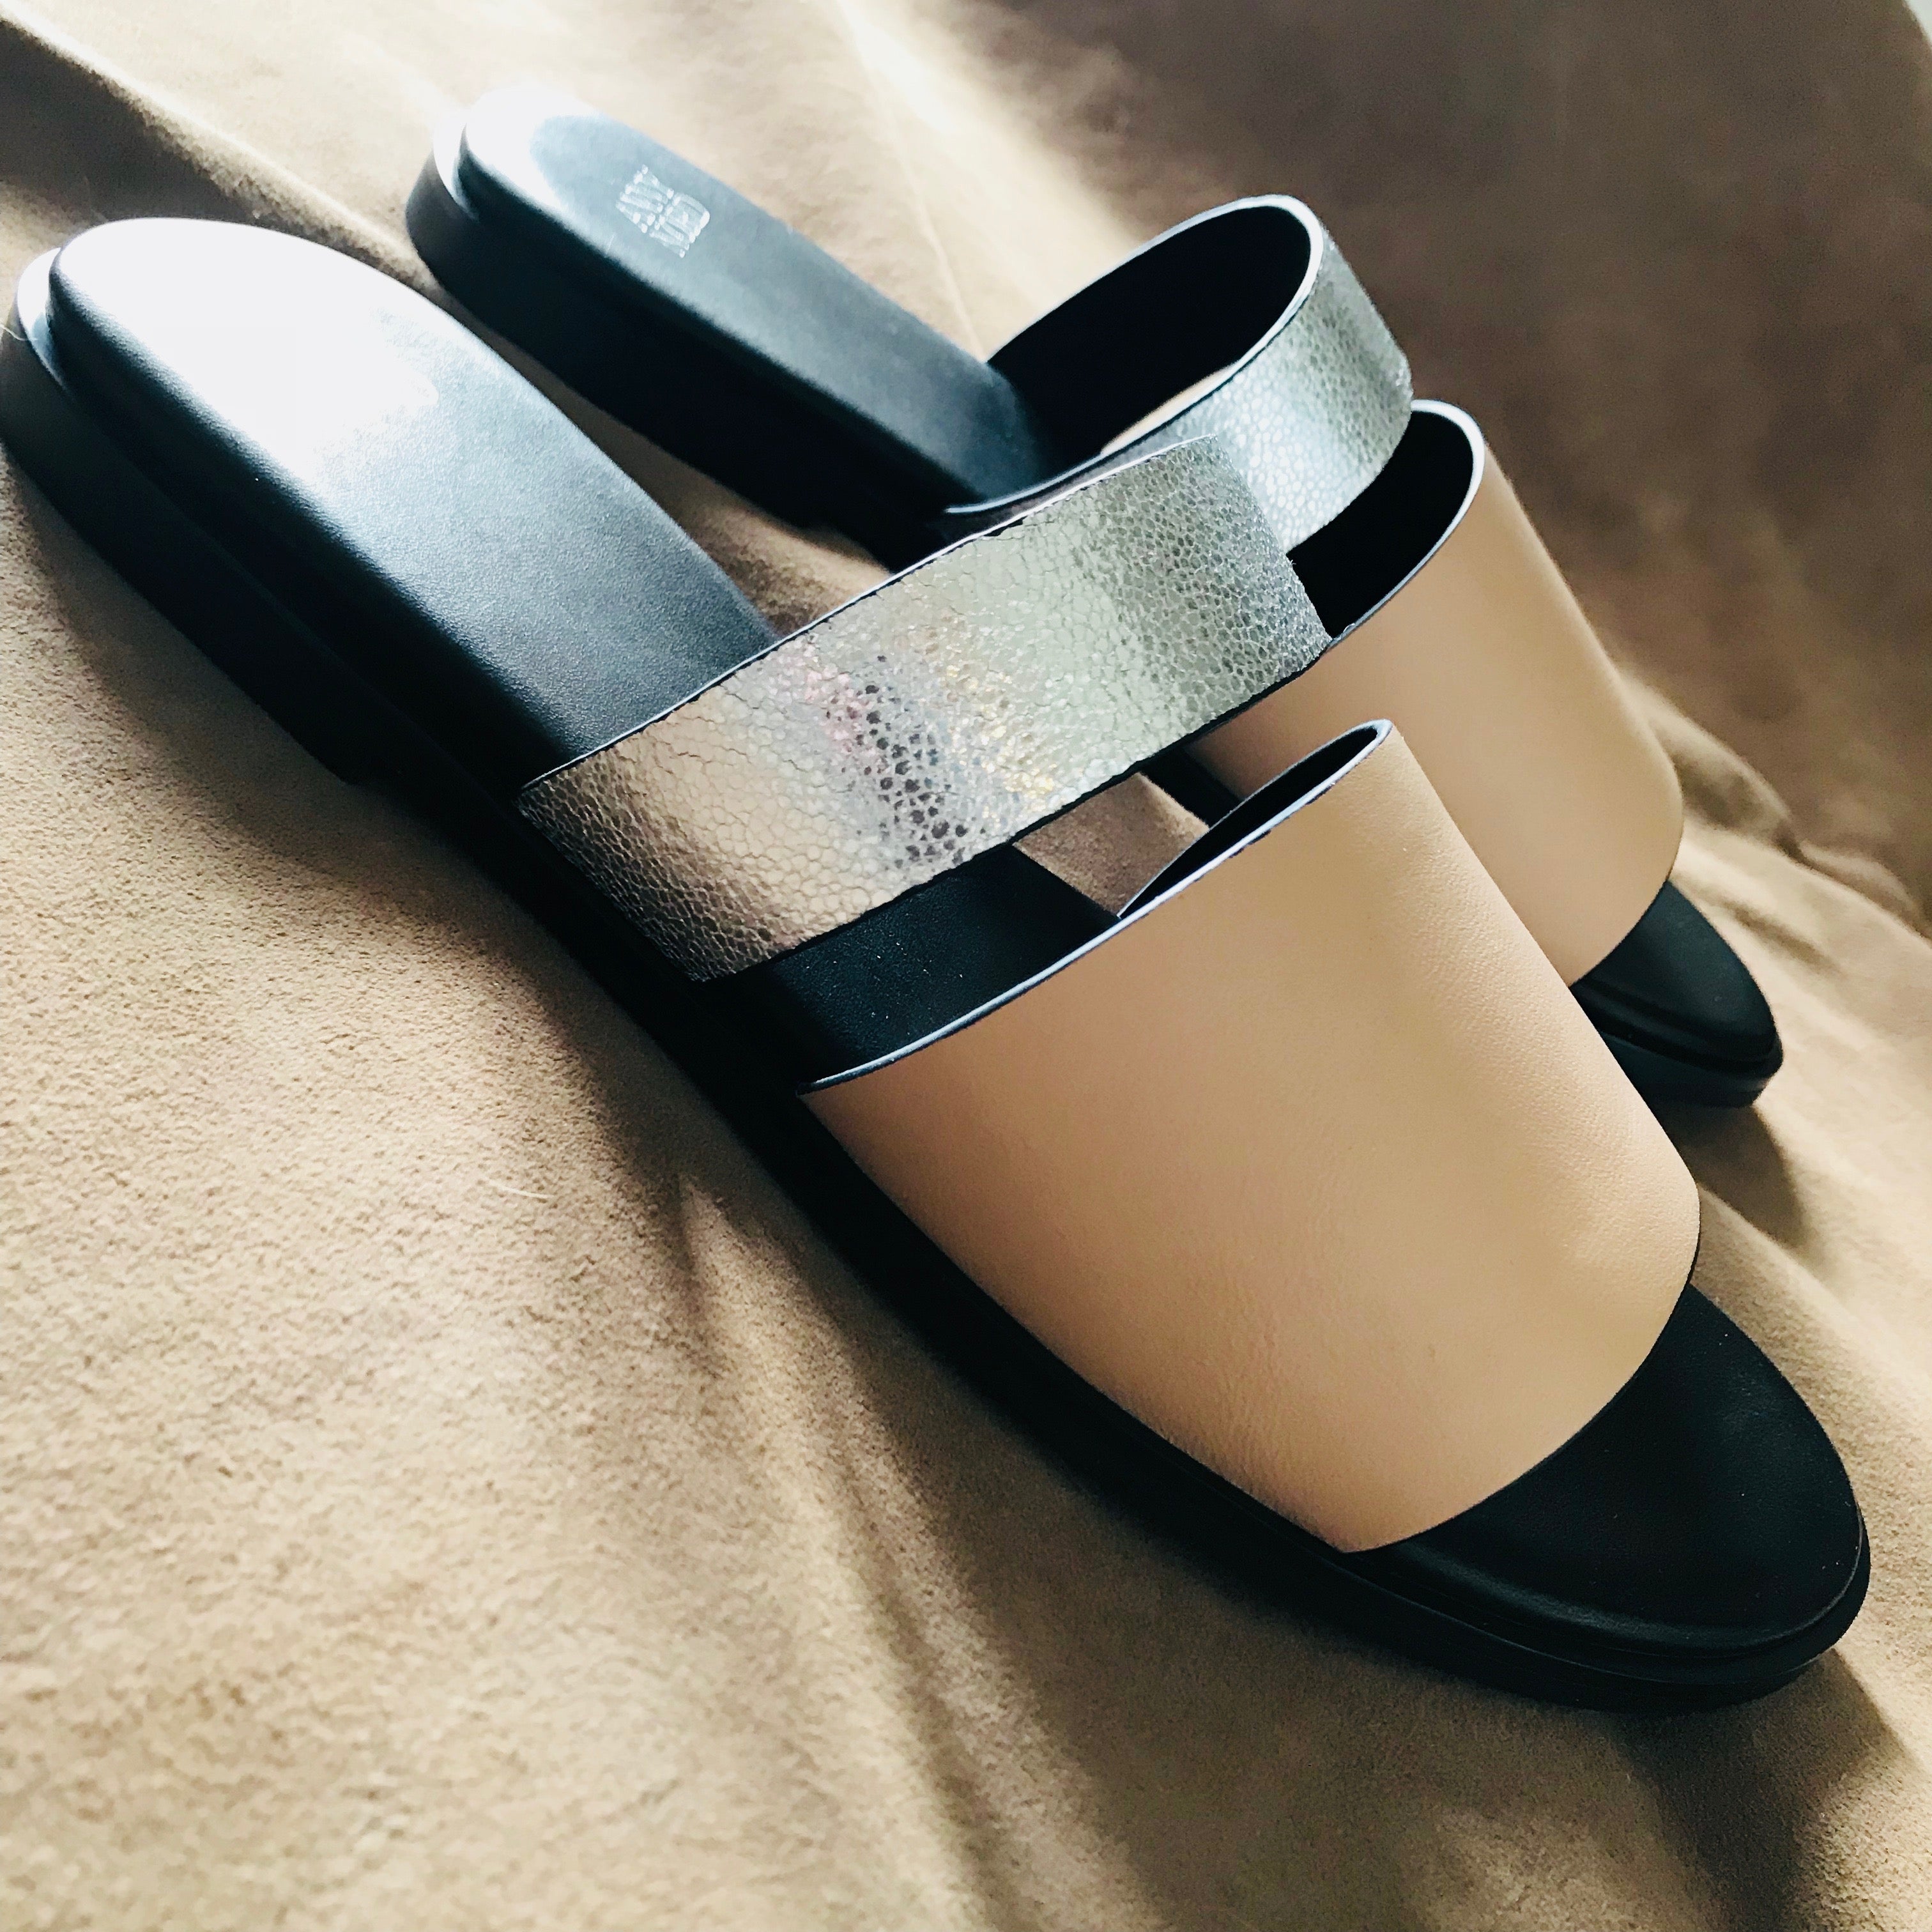 BUSY DOING NOTHING is a comfortable luxury slide sandal in pale nude and silver leather from Swedish shoe and accessory brand ANNY NORD